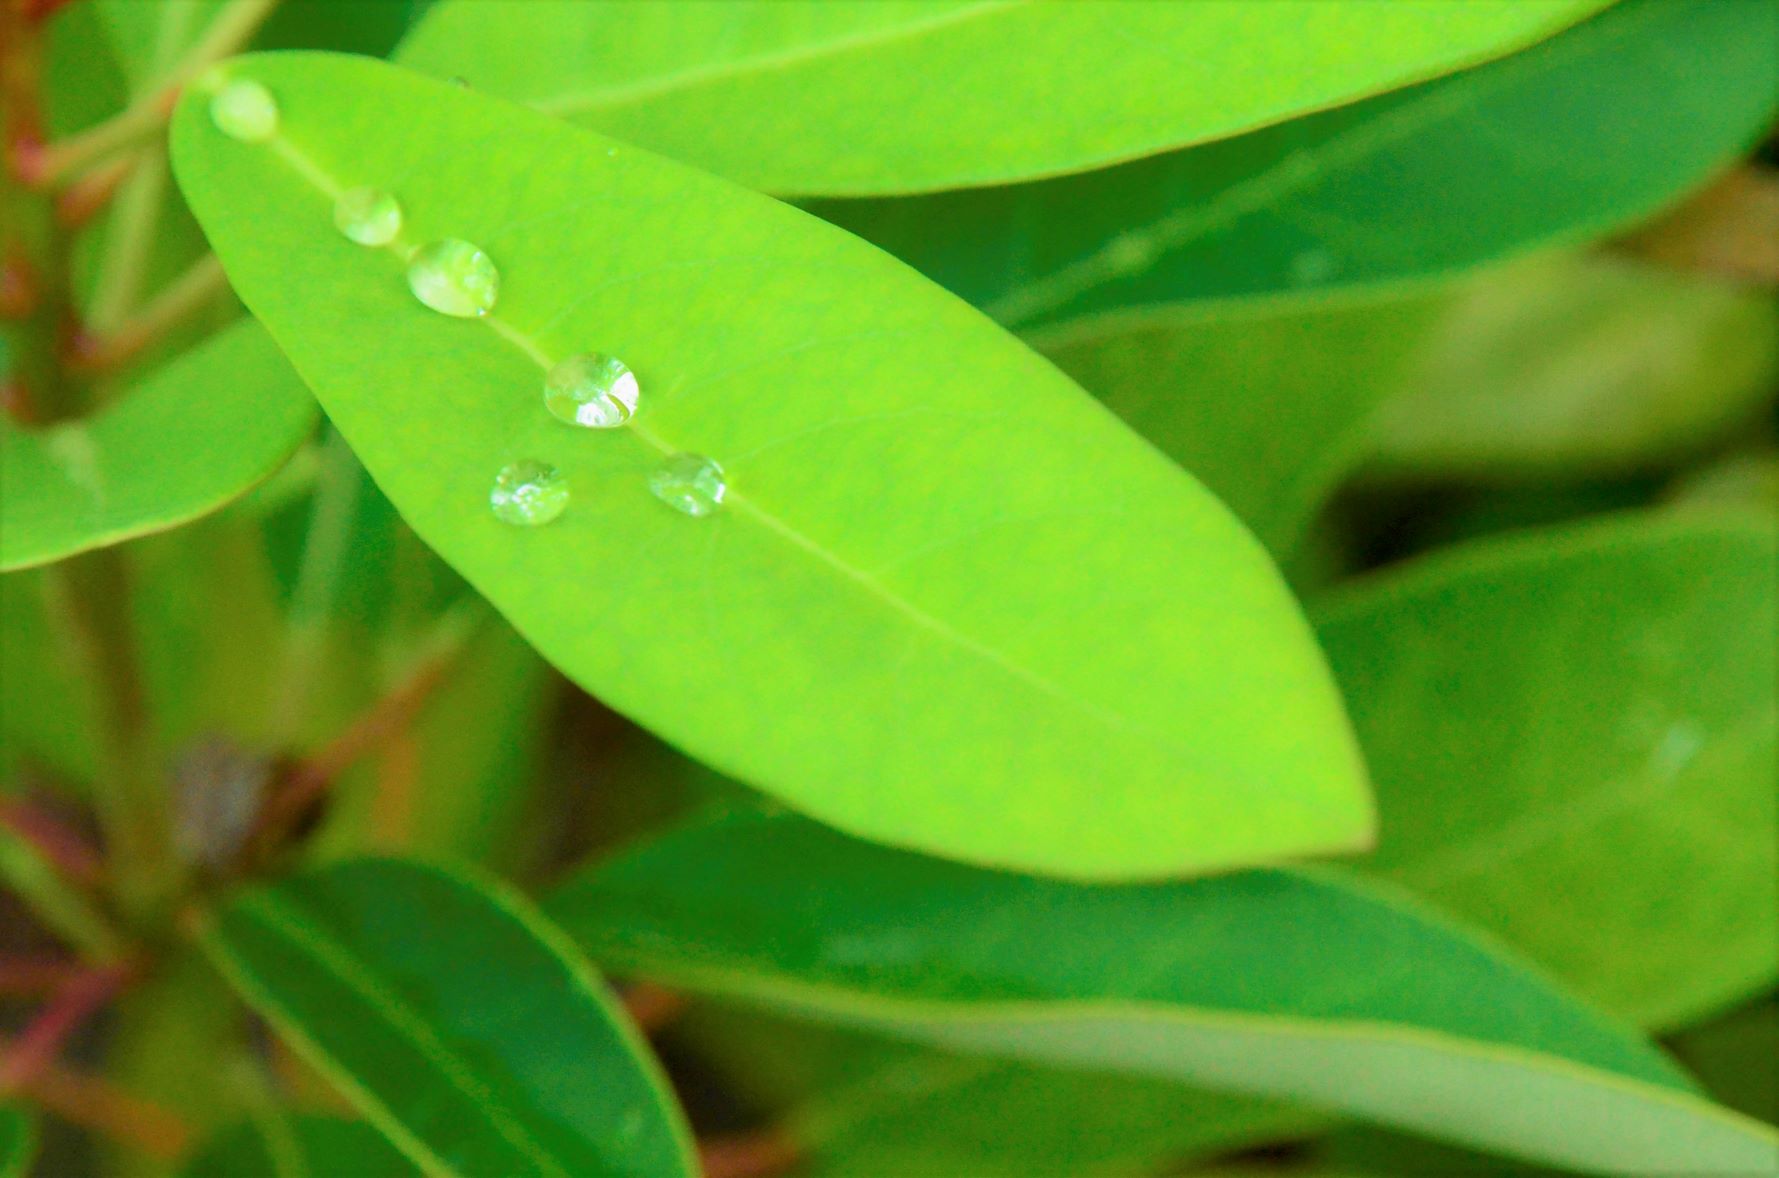 The drops on the leaves are shining beautifully